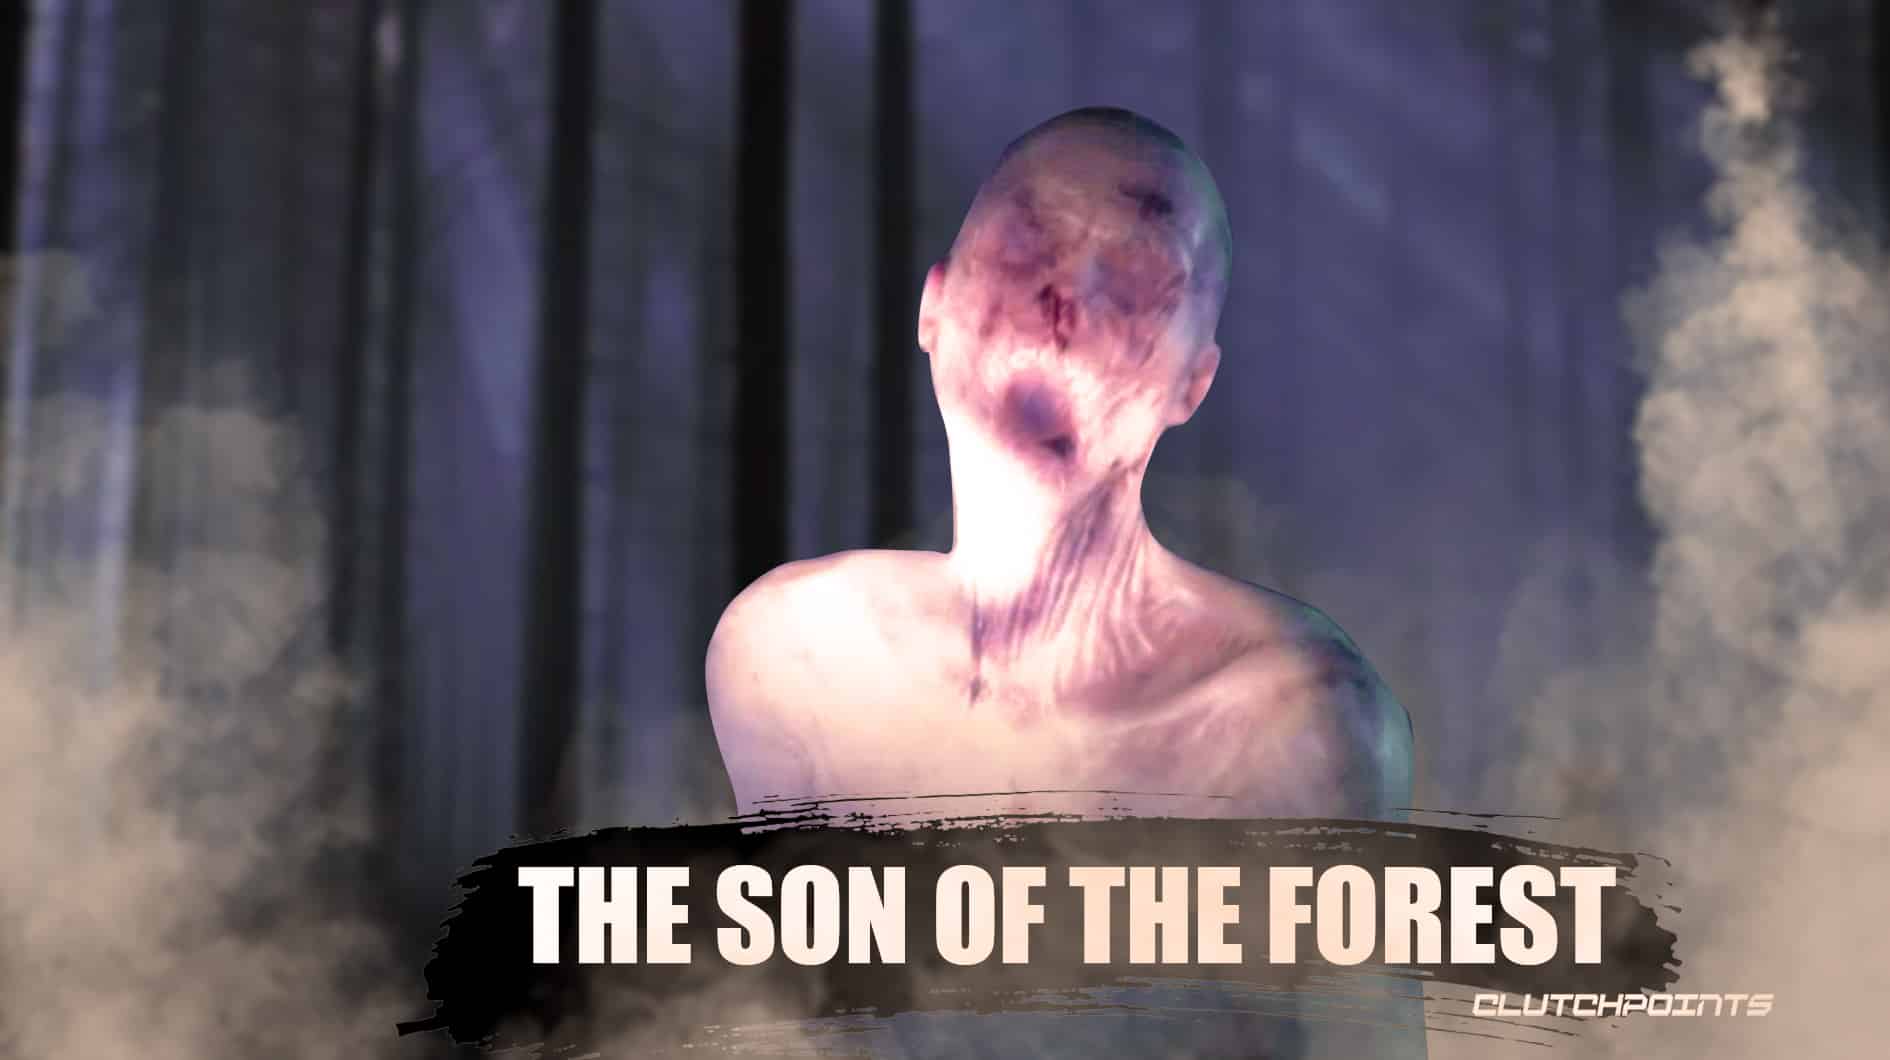 Sons Of The Forest: PS5 Release Date, Gameplay, Story, And More